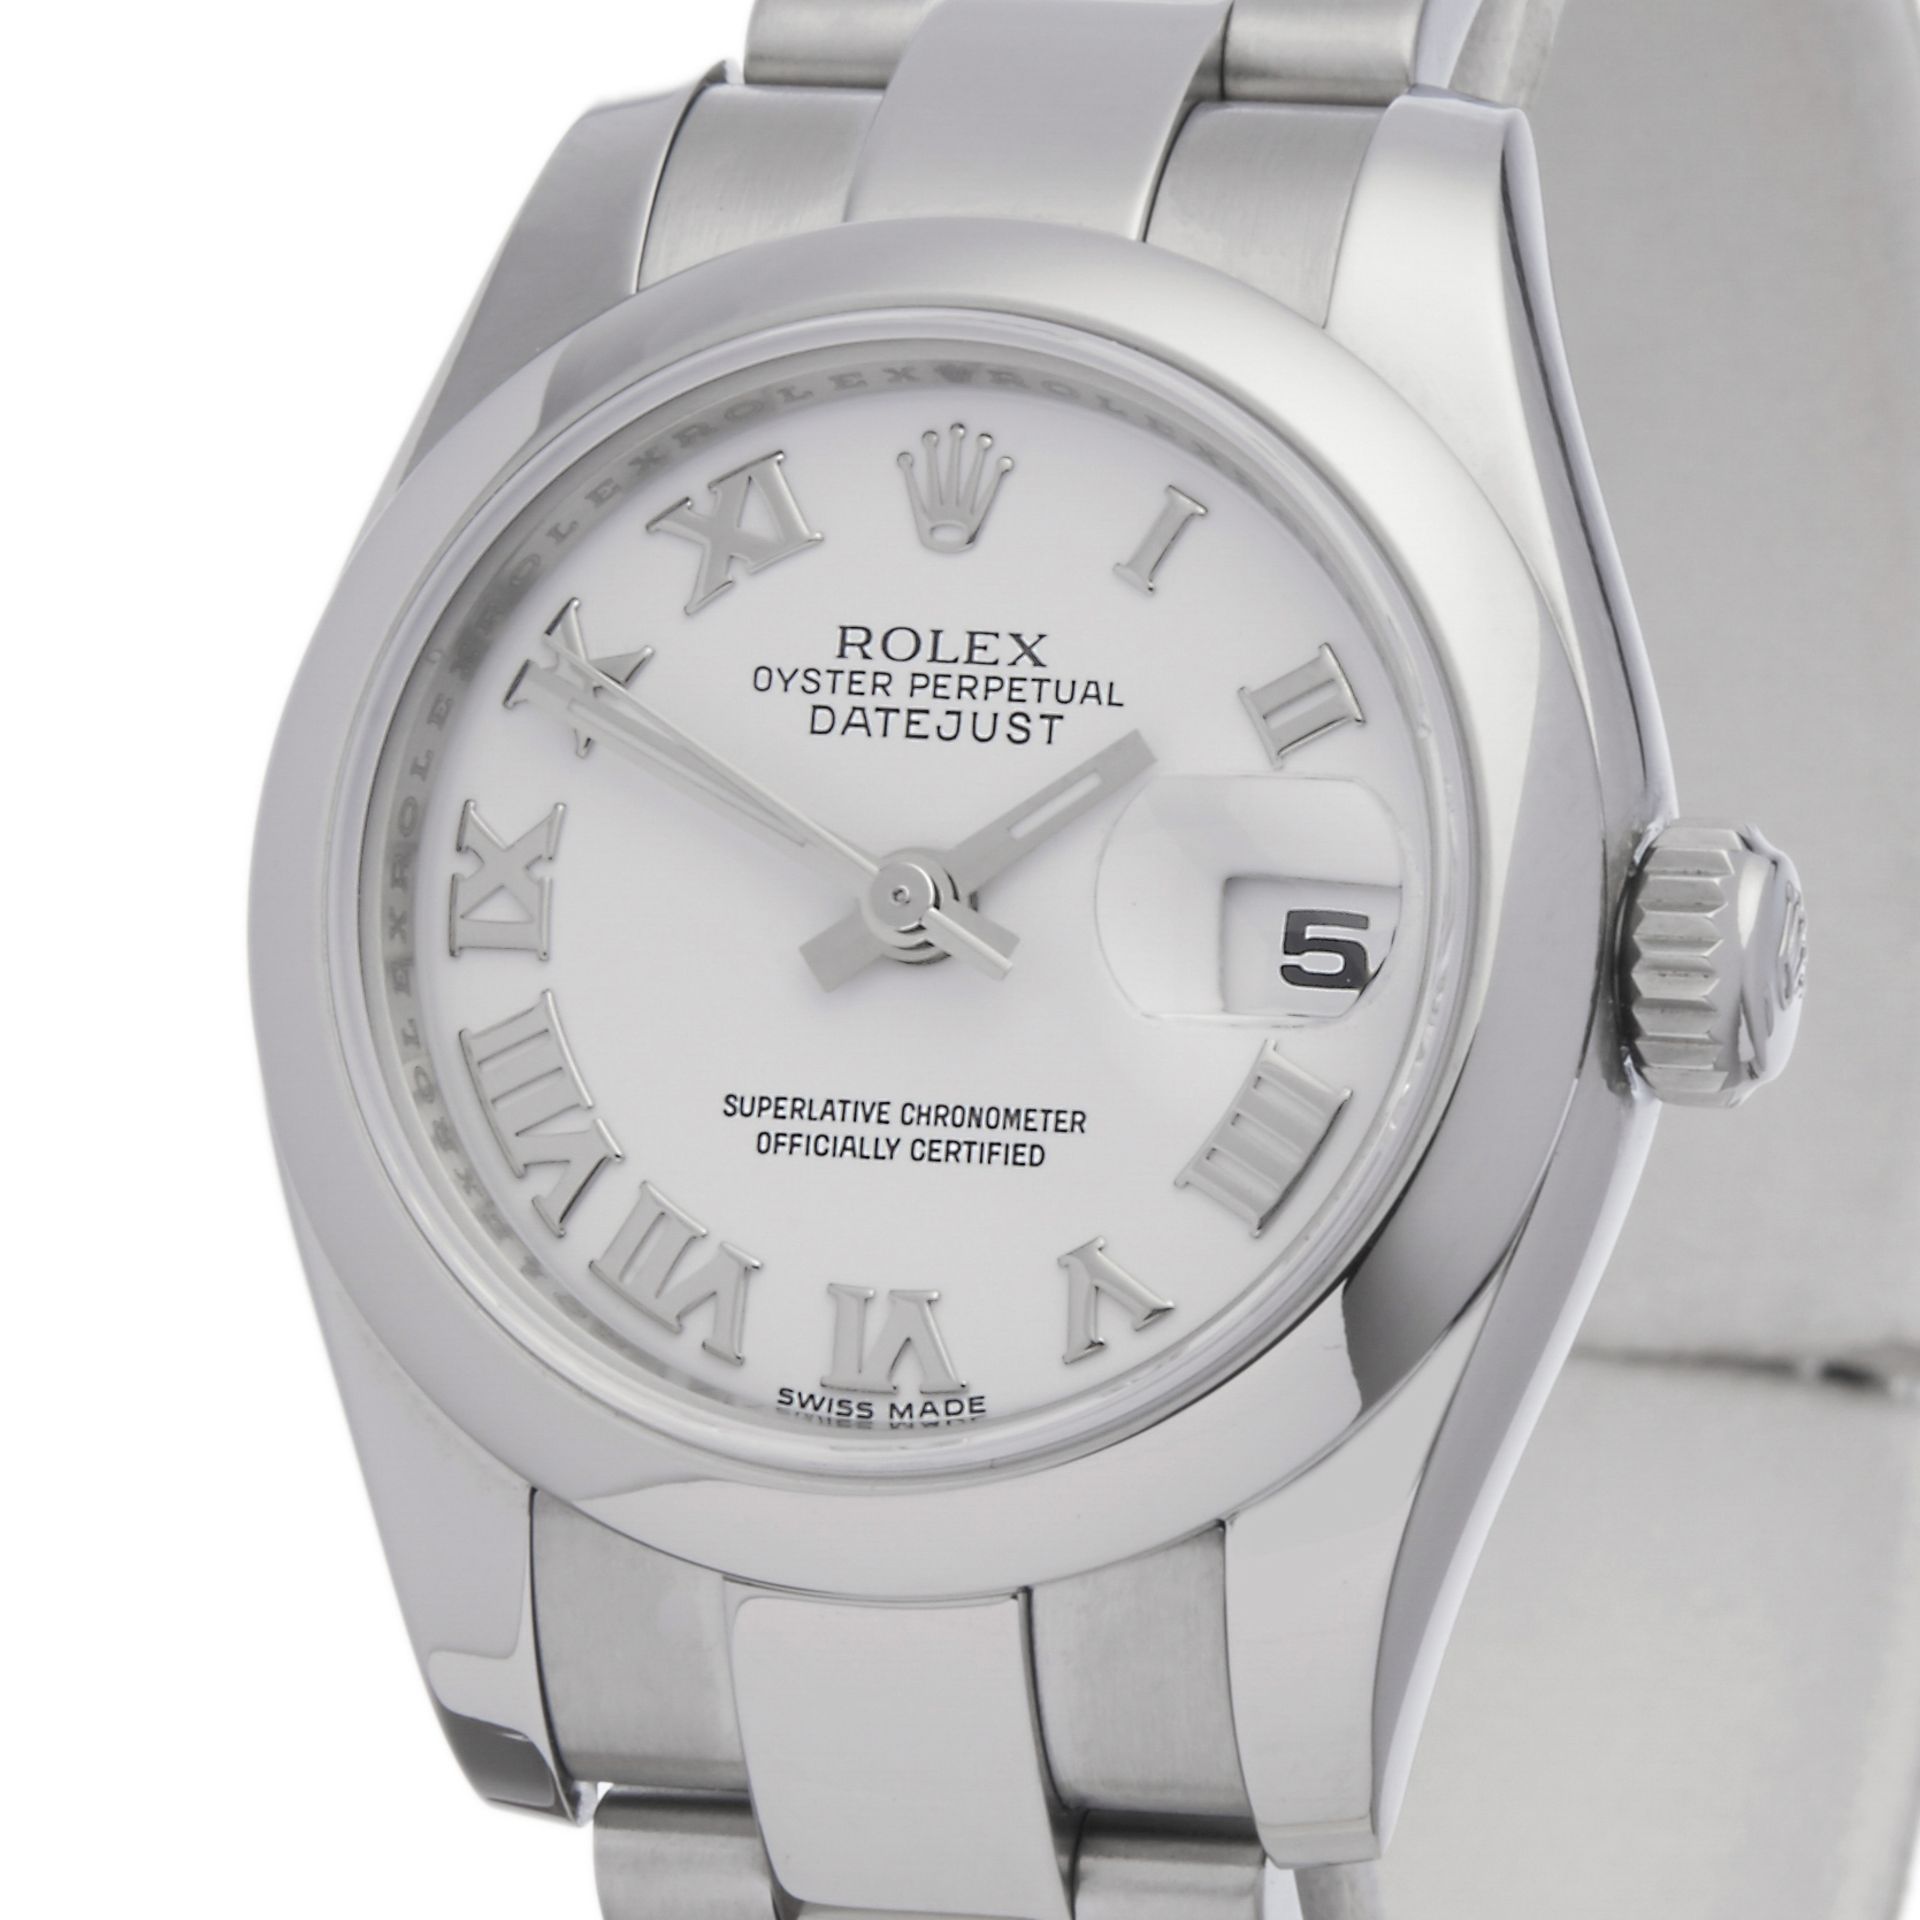 Rolex Datejust 28mm Stainless Steel - 179160 - Image 3 of 7